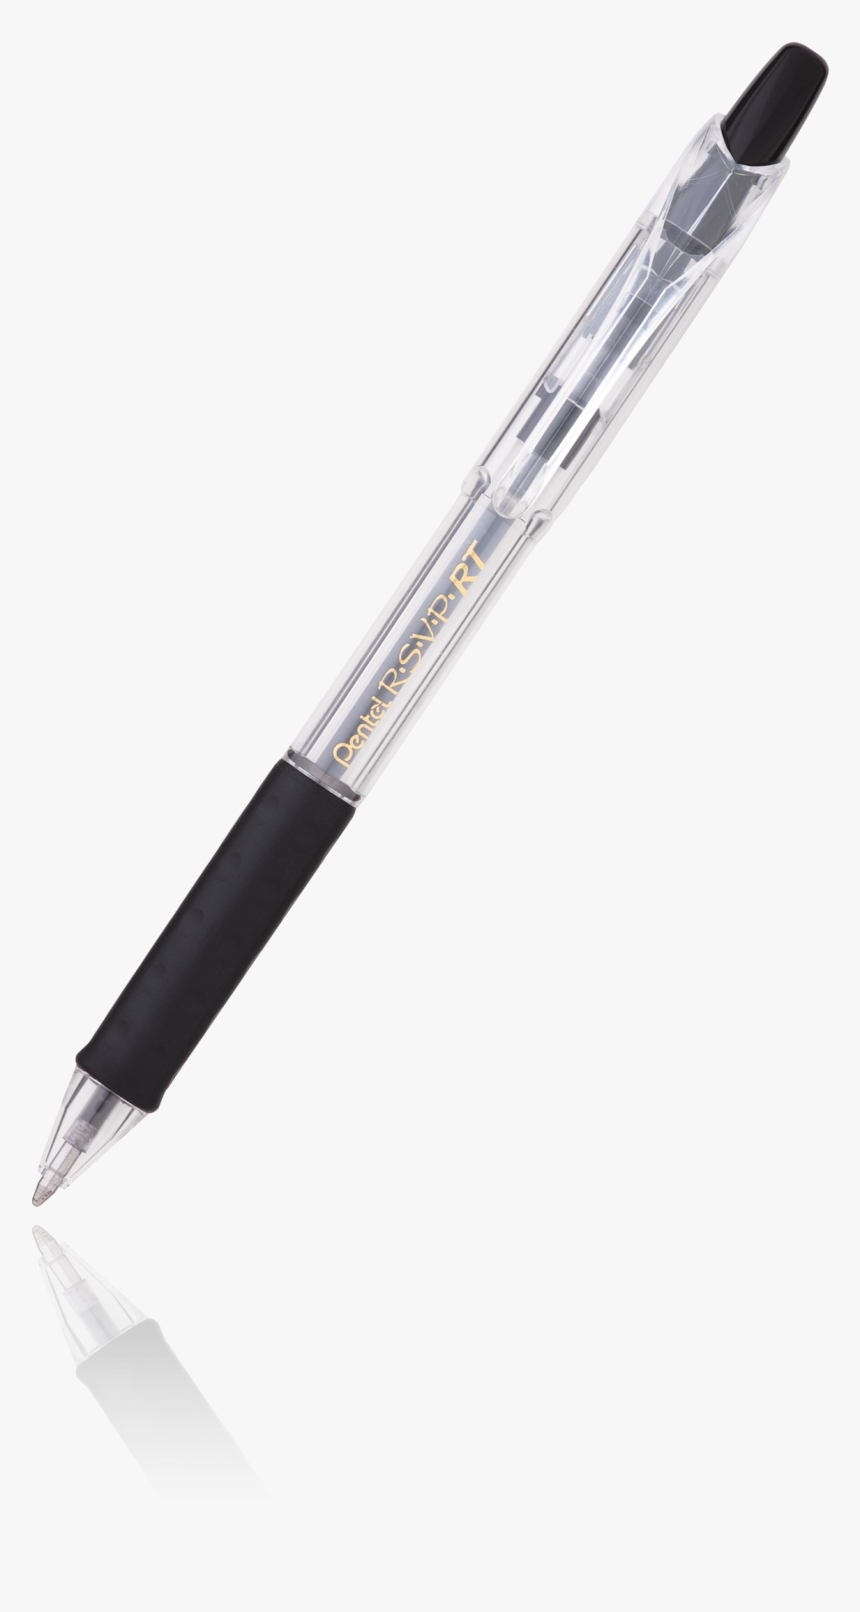 Ballpoint Pen Png - Transparent Ball Point Pen, Png Download, Free Download